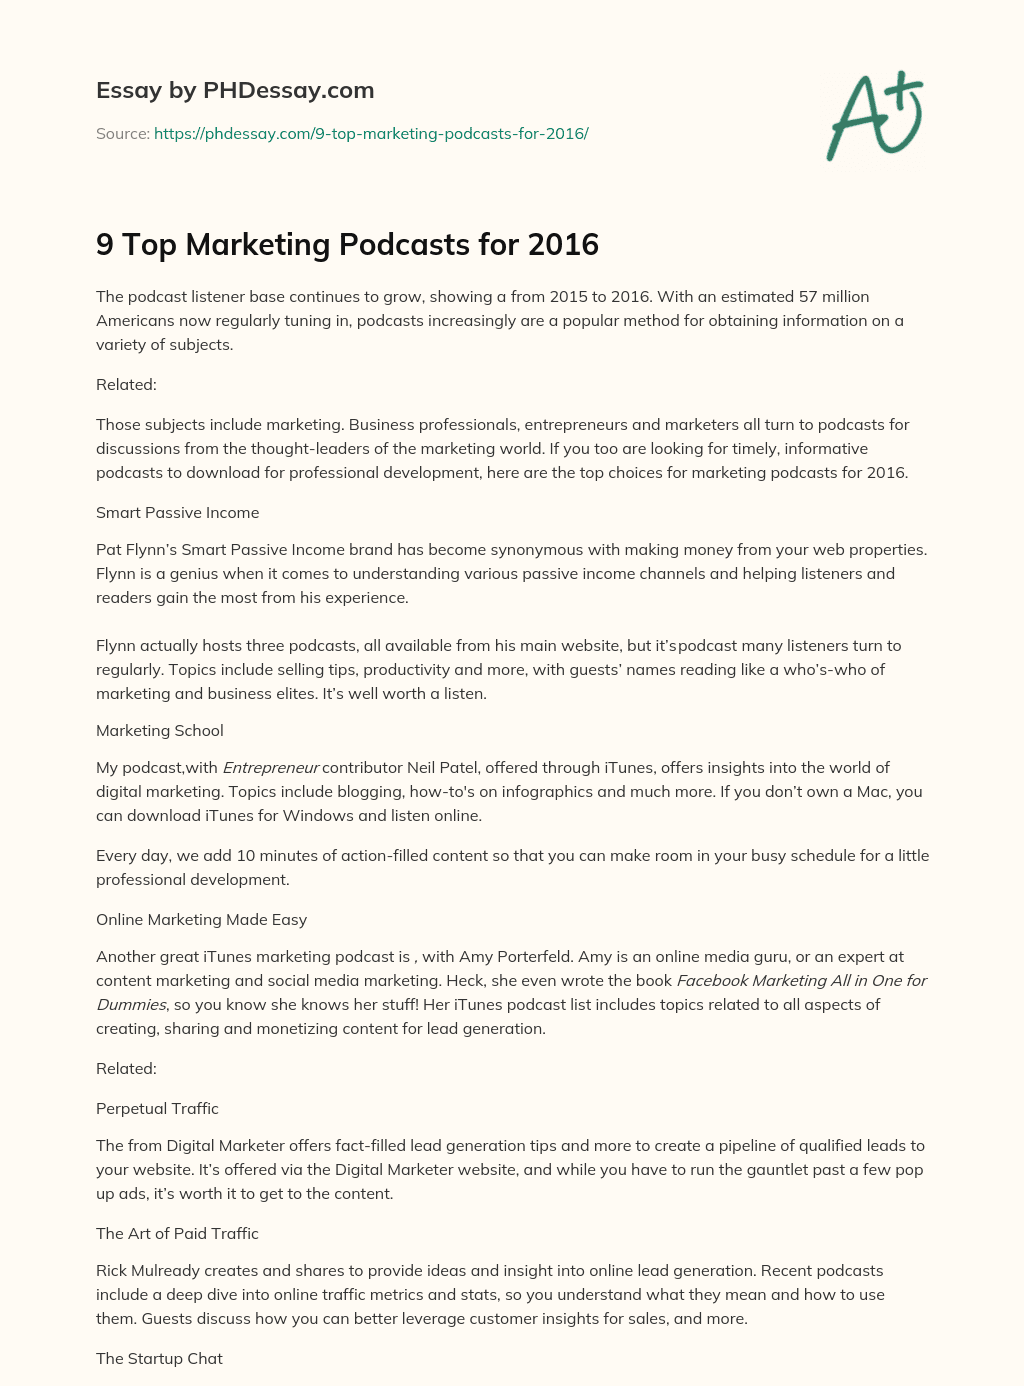 9 Top Marketing Podcasts for 2016 essay